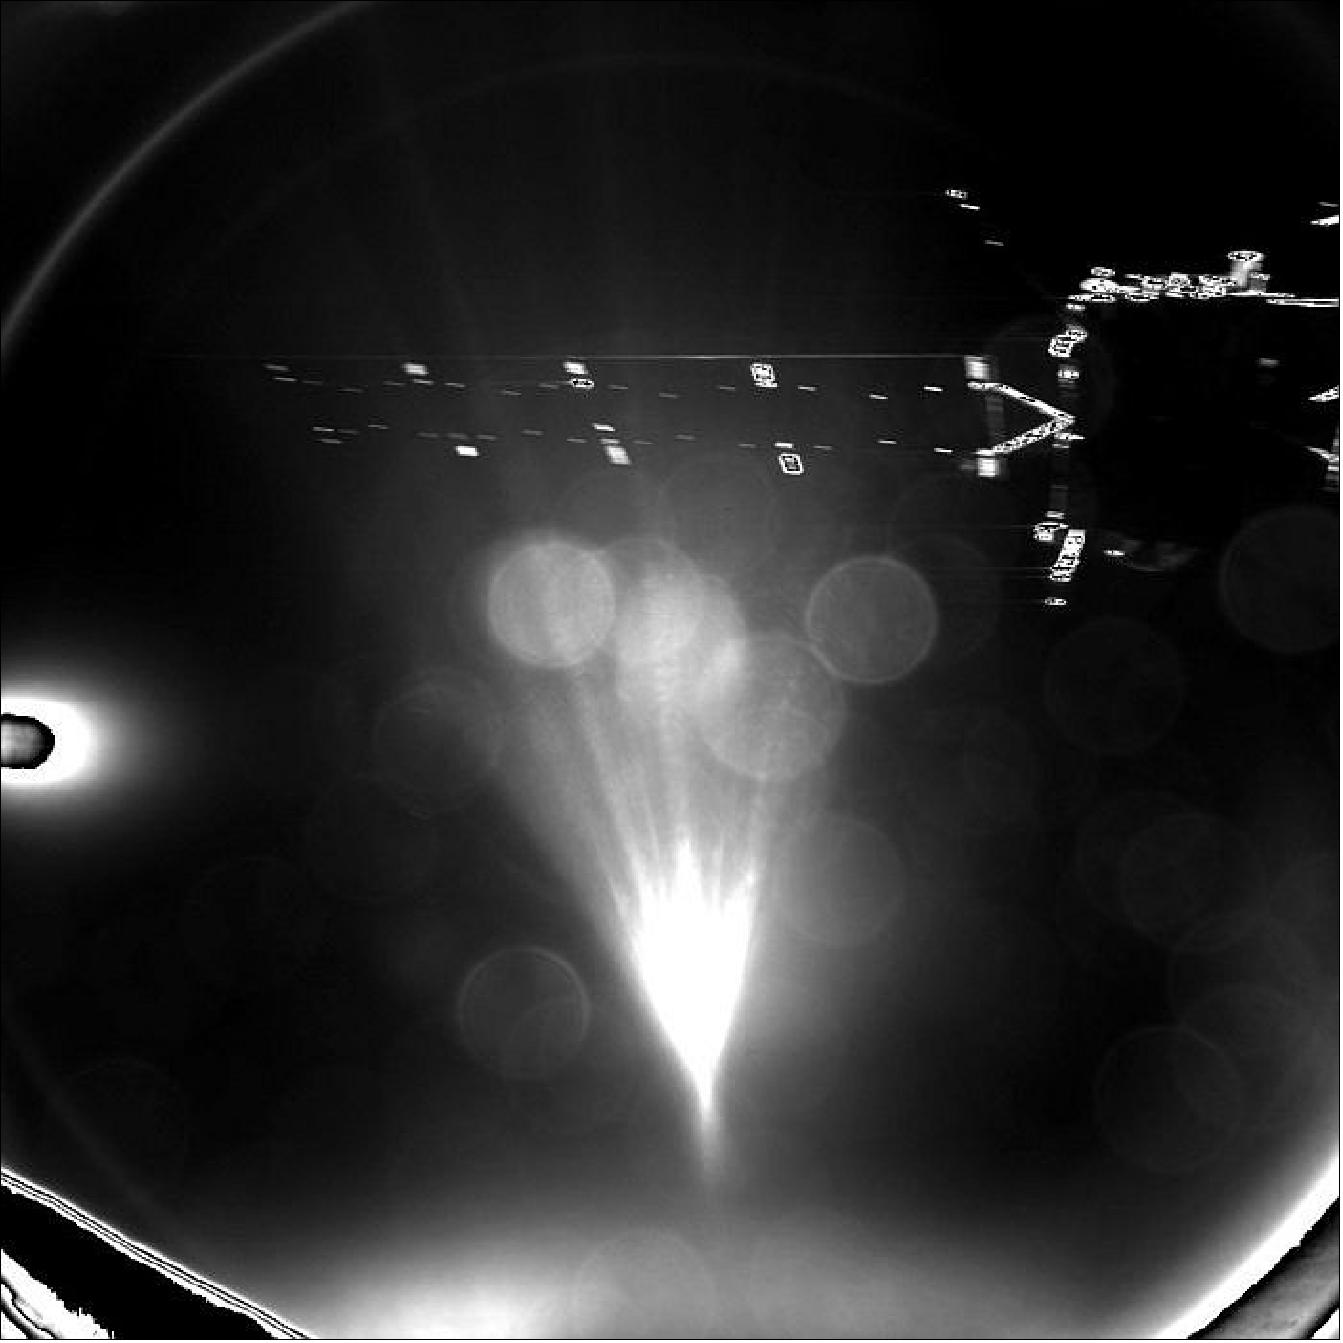 Figure 158: Rosetta’s lander Philae took this parting shot of its mothership shortly after separation. The image was taken with the lander’s CIVA-P imaging system and captures one of Rosetta's 14 m long solar arrays. It was stored onboard the lander until the radio link was established with Rosetta around two hours after separation, and then relayed to Earth (image credit: ESA, Rosetta, Philae, CIVA). 239)